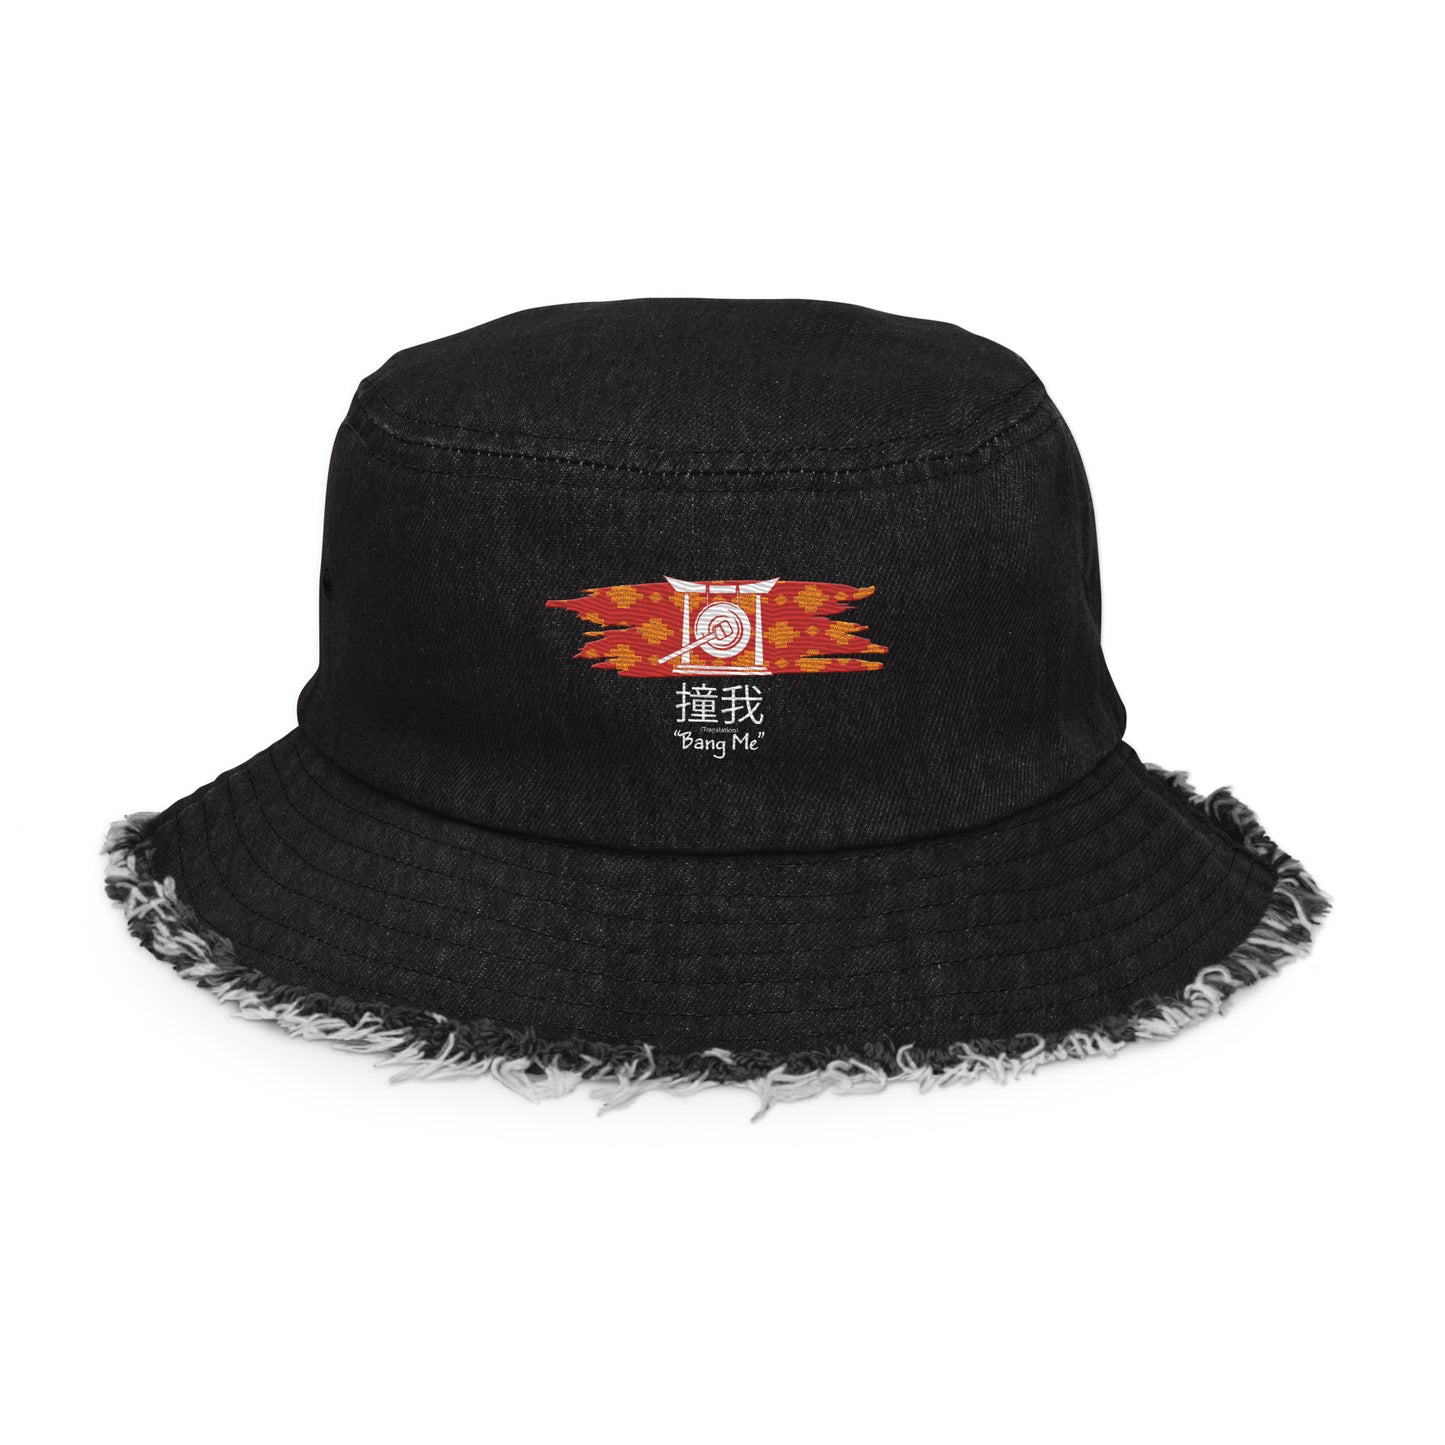 Bang Me Embroidered Bucket Hat